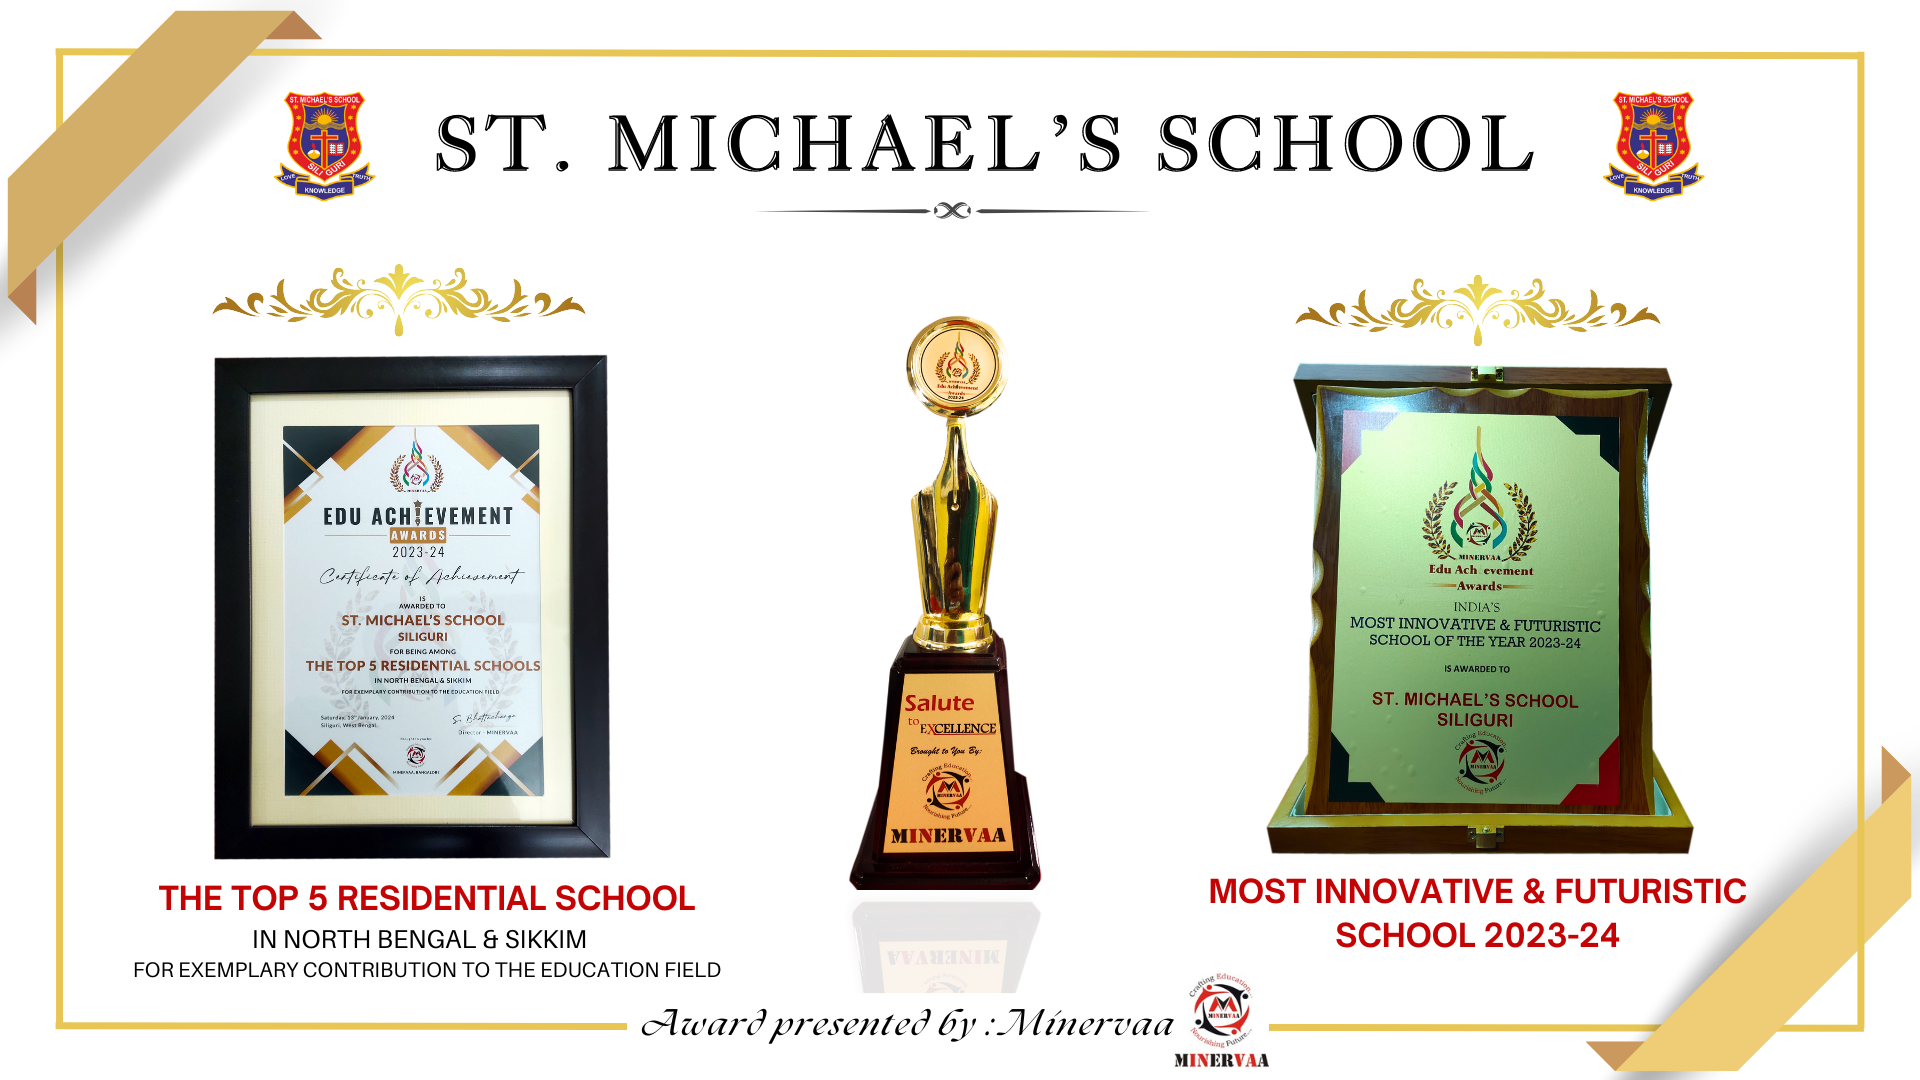 top 5 residential schools and the most innovative & futuristic school for the year 2023-24